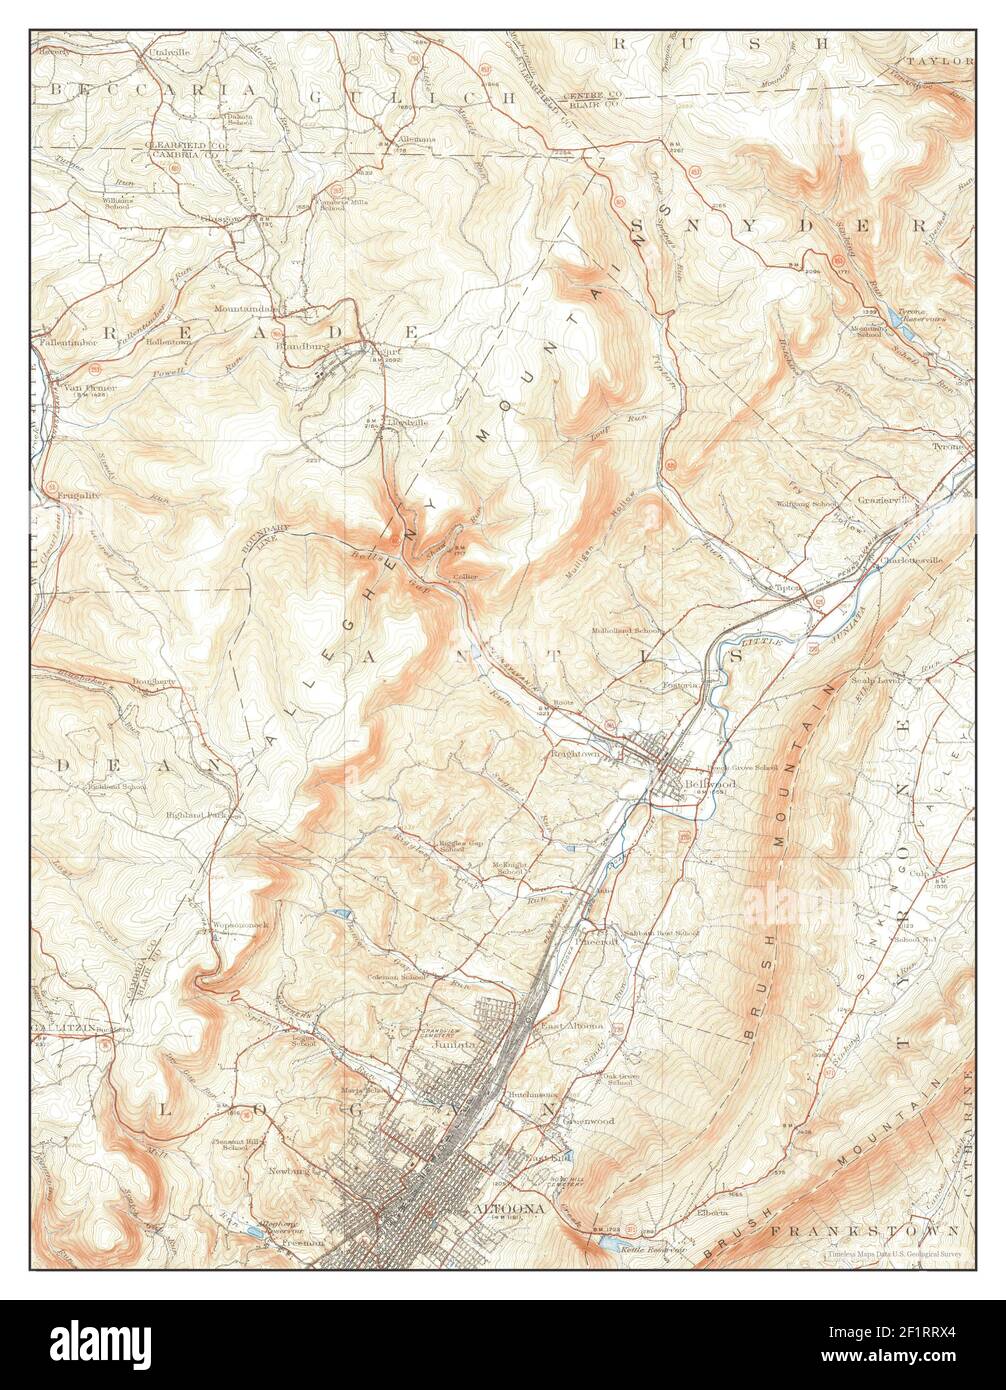 Altoona, Pennsylvania, map 1920, 1:62500, United States of America by Timeless Maps, data U.S. Geological Survey Stock Photo